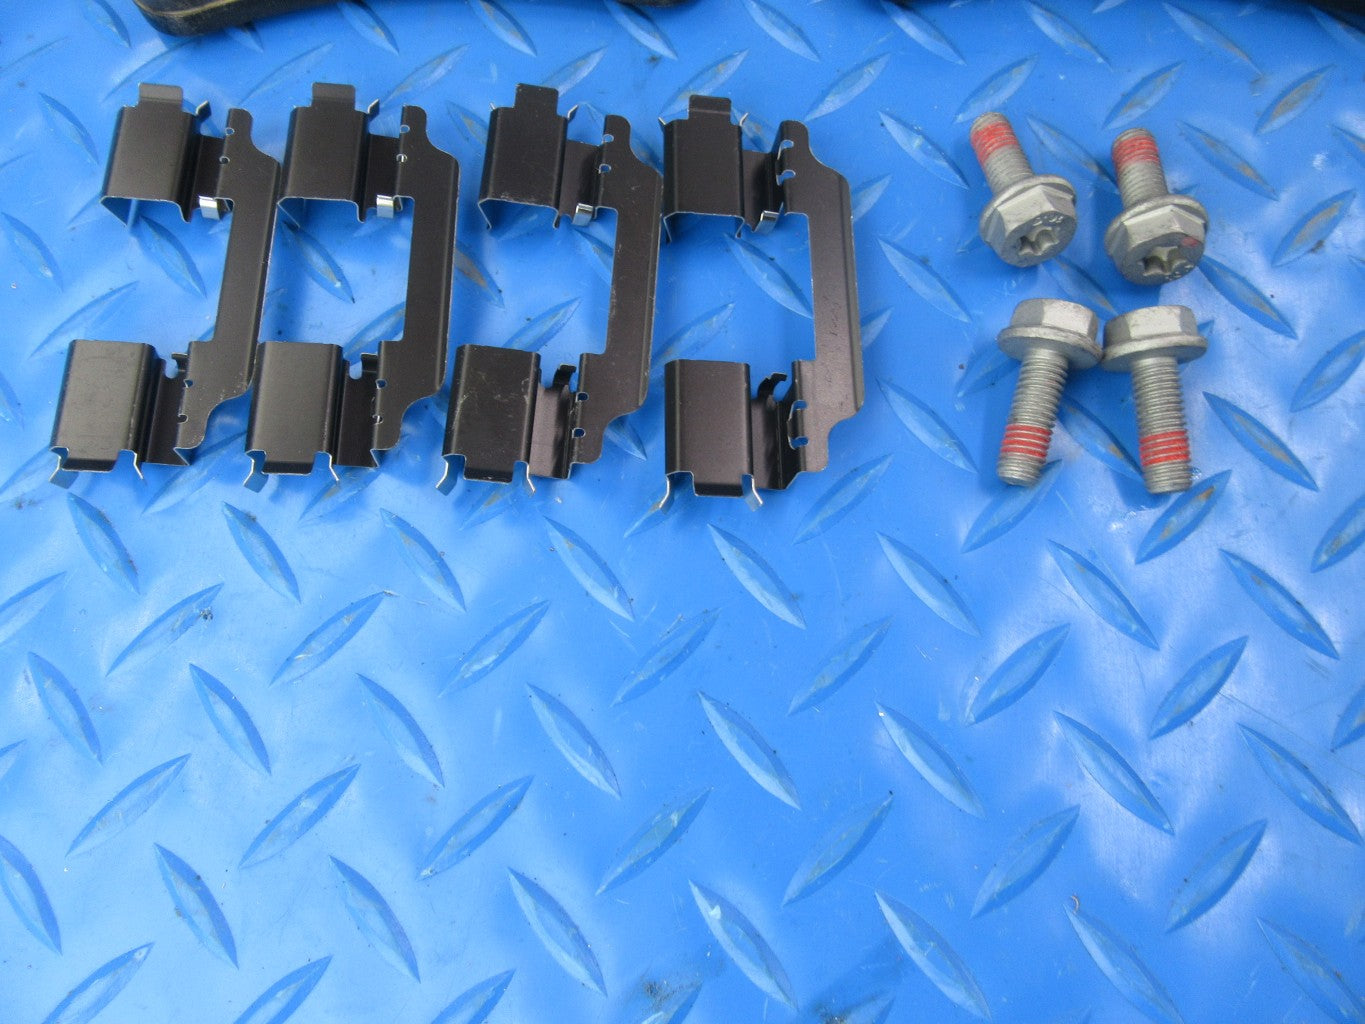 Mercedes W222 S63 S65 Amg front and rear brake pads TopEuro #9243